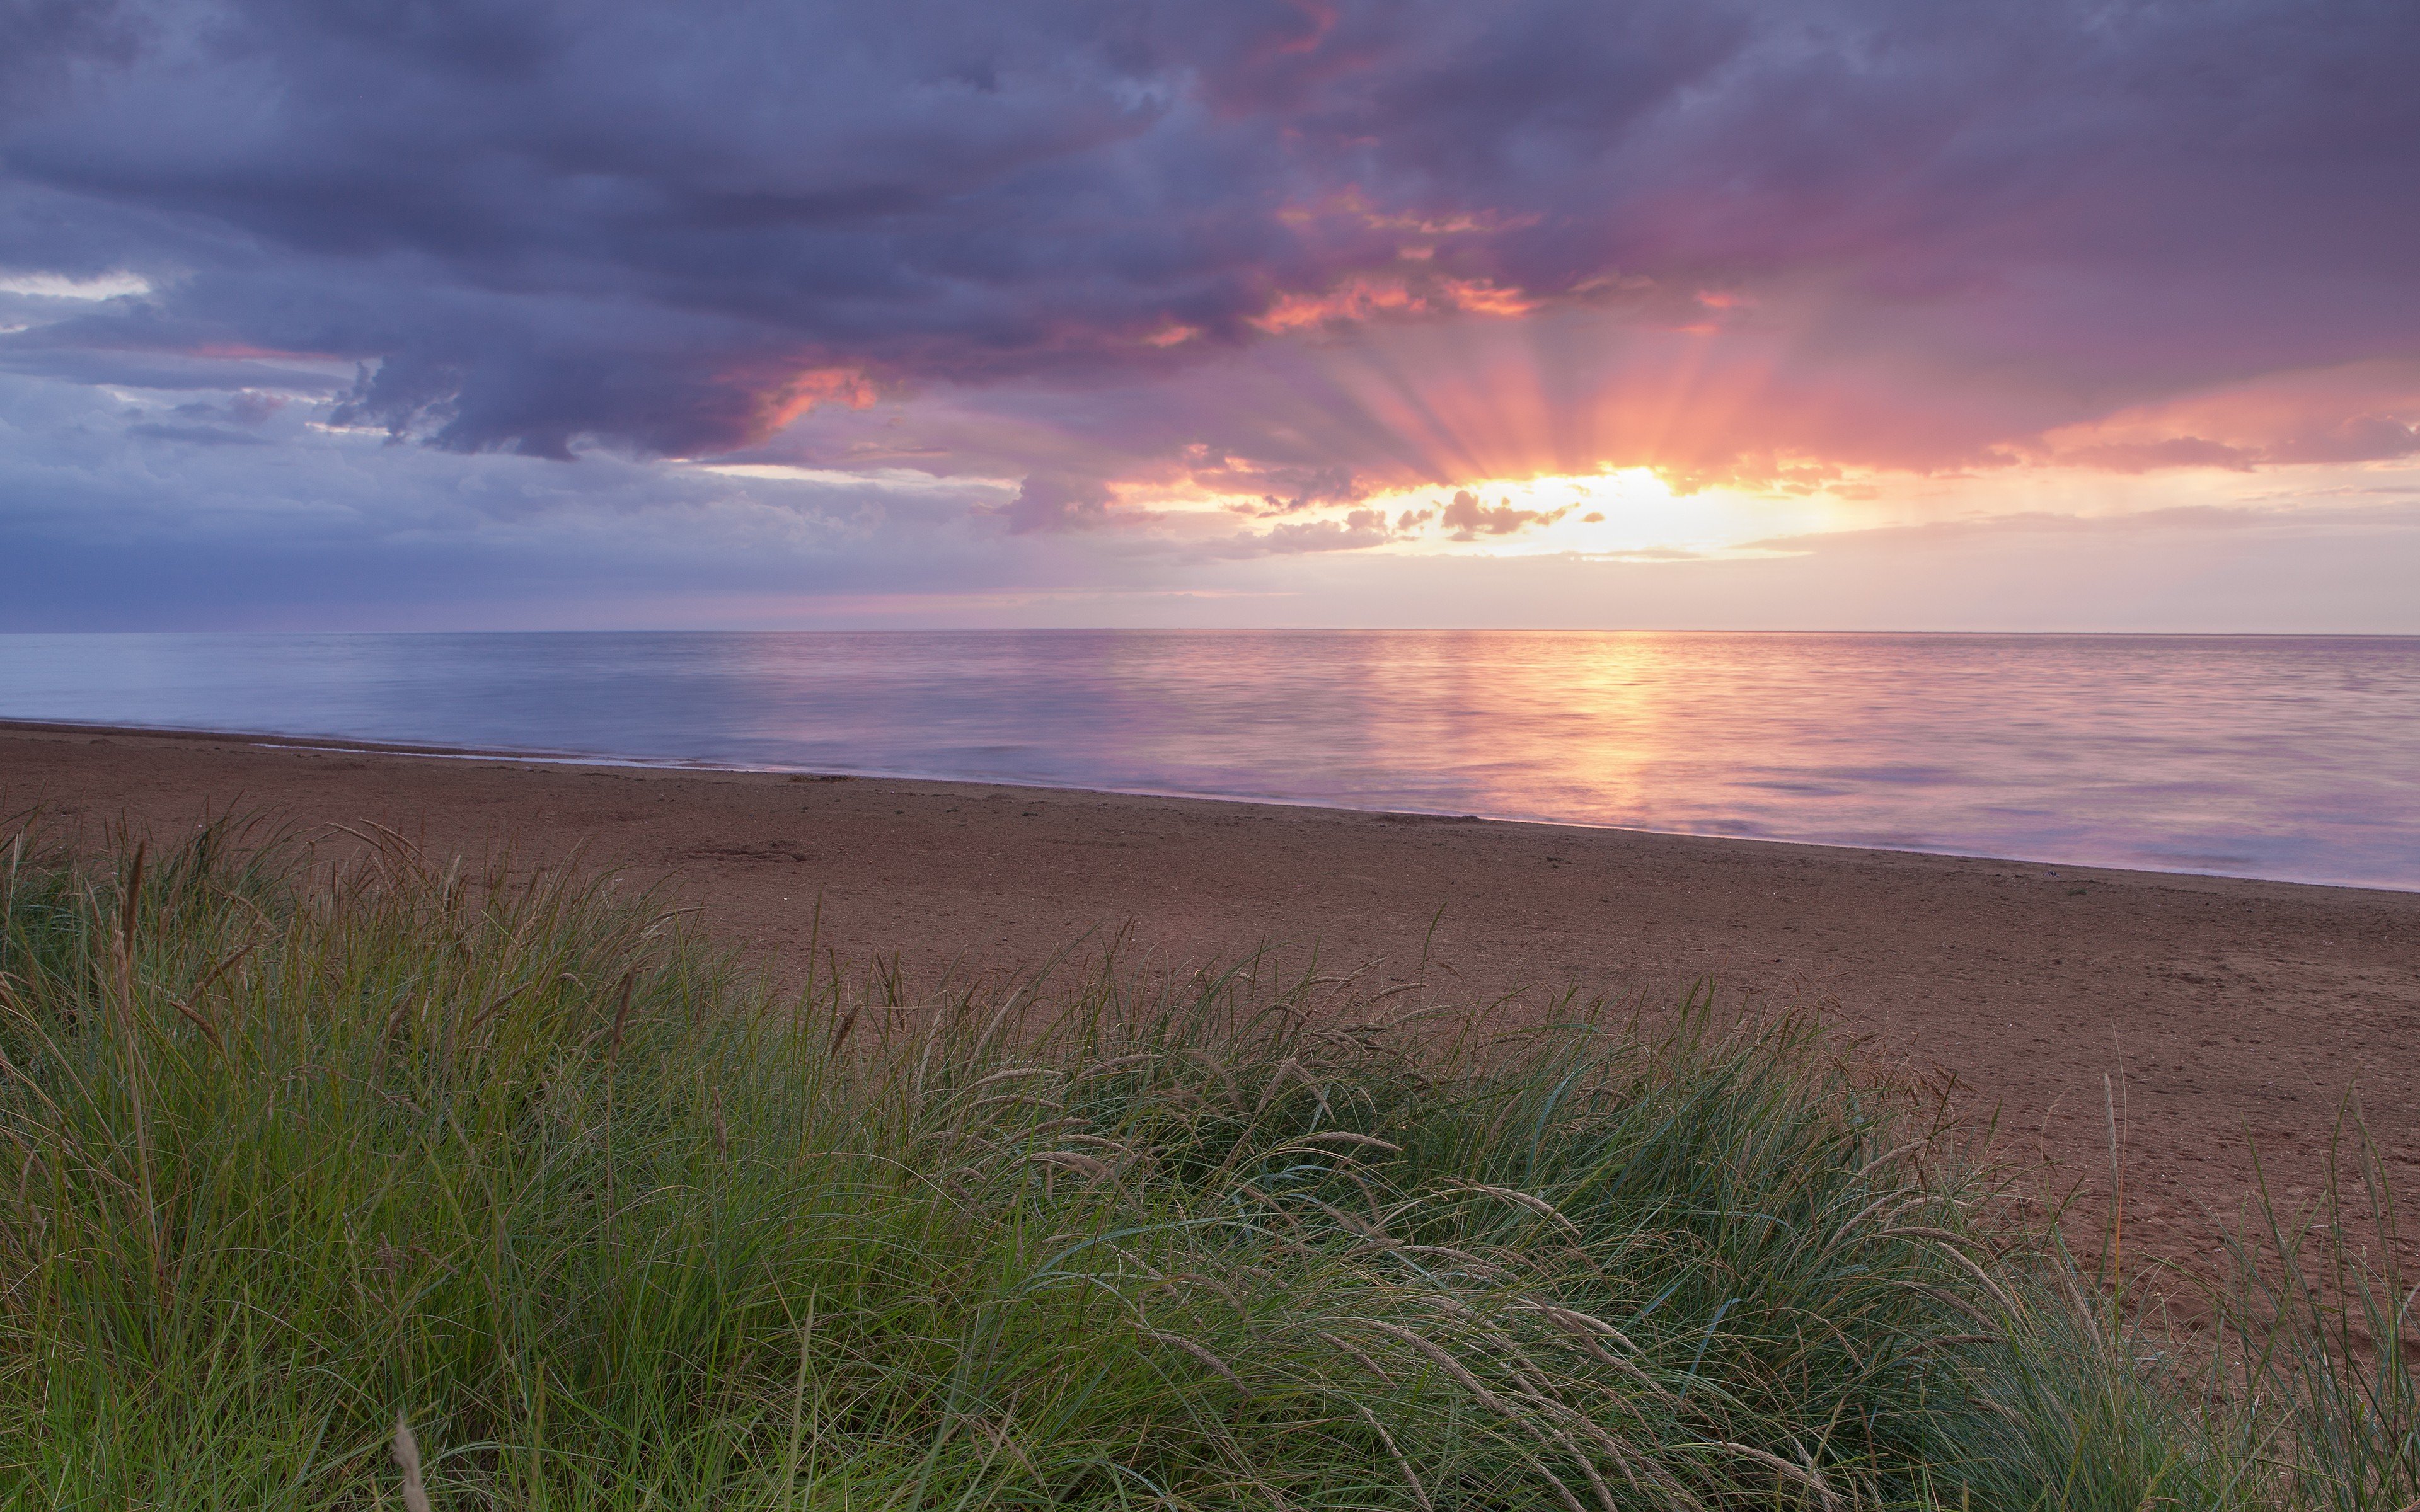 sunset, Clouds, Landscapes, Nature, Coast, Grass, Sunlight, United, Kingdom, Hdr, Photography, Skies, Sea, Beaches Wallpaper